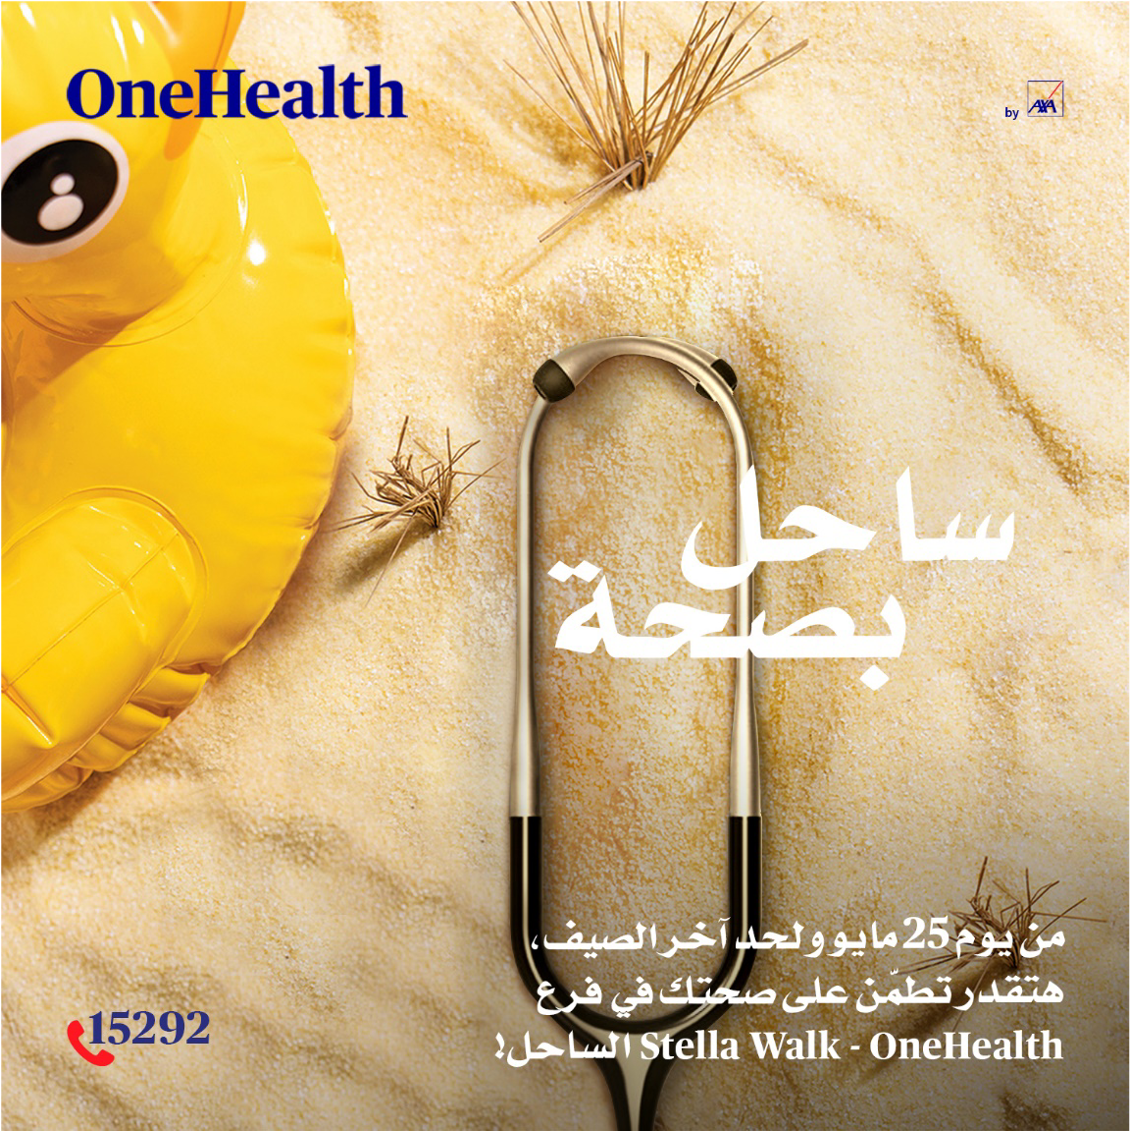 ONEHEALTH – Summer campaign